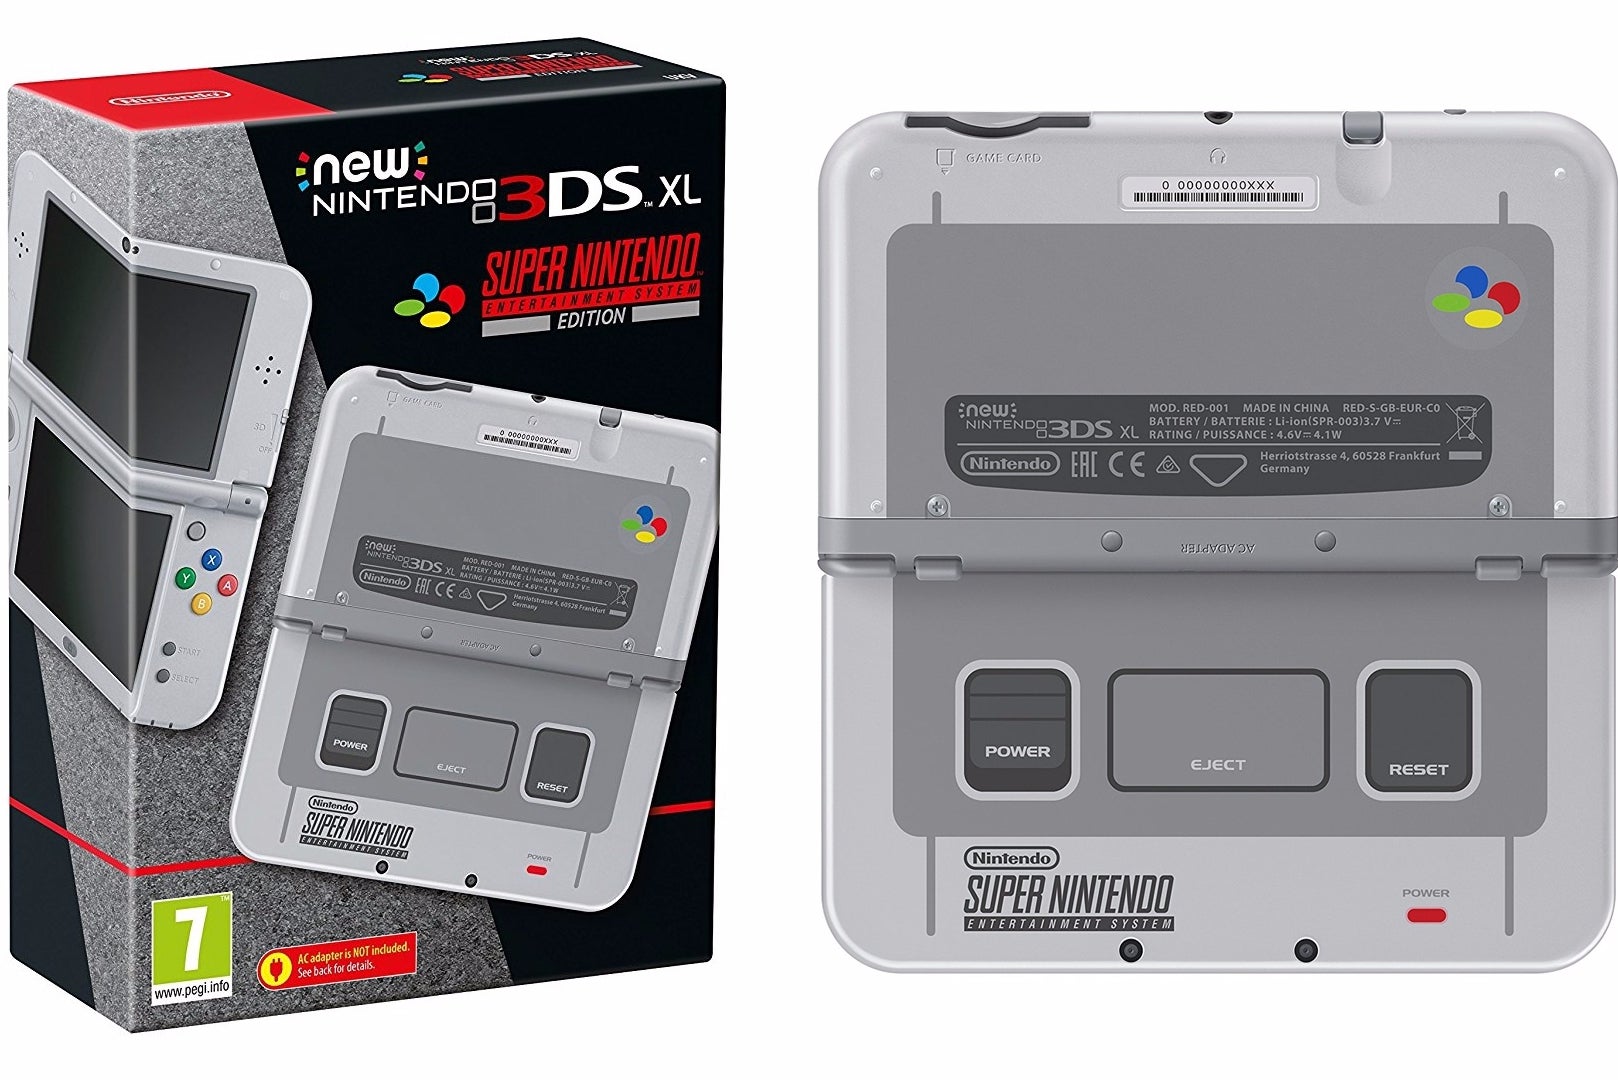 Jelly Deals roundup: SNES Edition 3DS XL, Humble's Sale, Xbox One bundles and more | Eurogamer.net